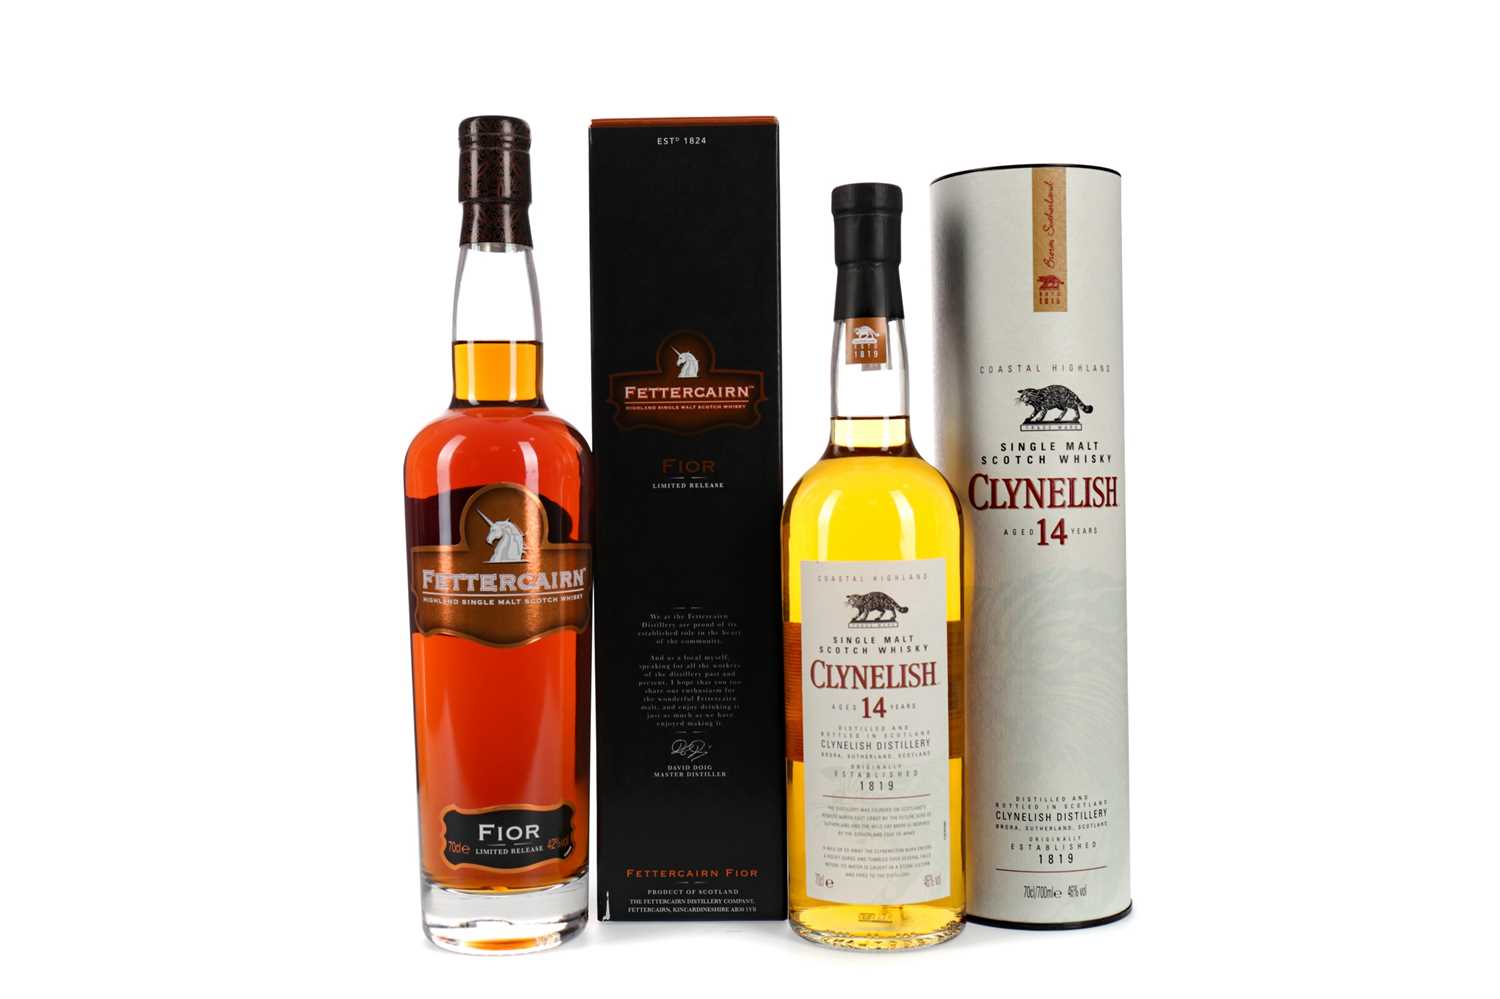 Lot 1 - CLYNELISH AGED 14 YEARS AND FETTERCAIRN FIOR